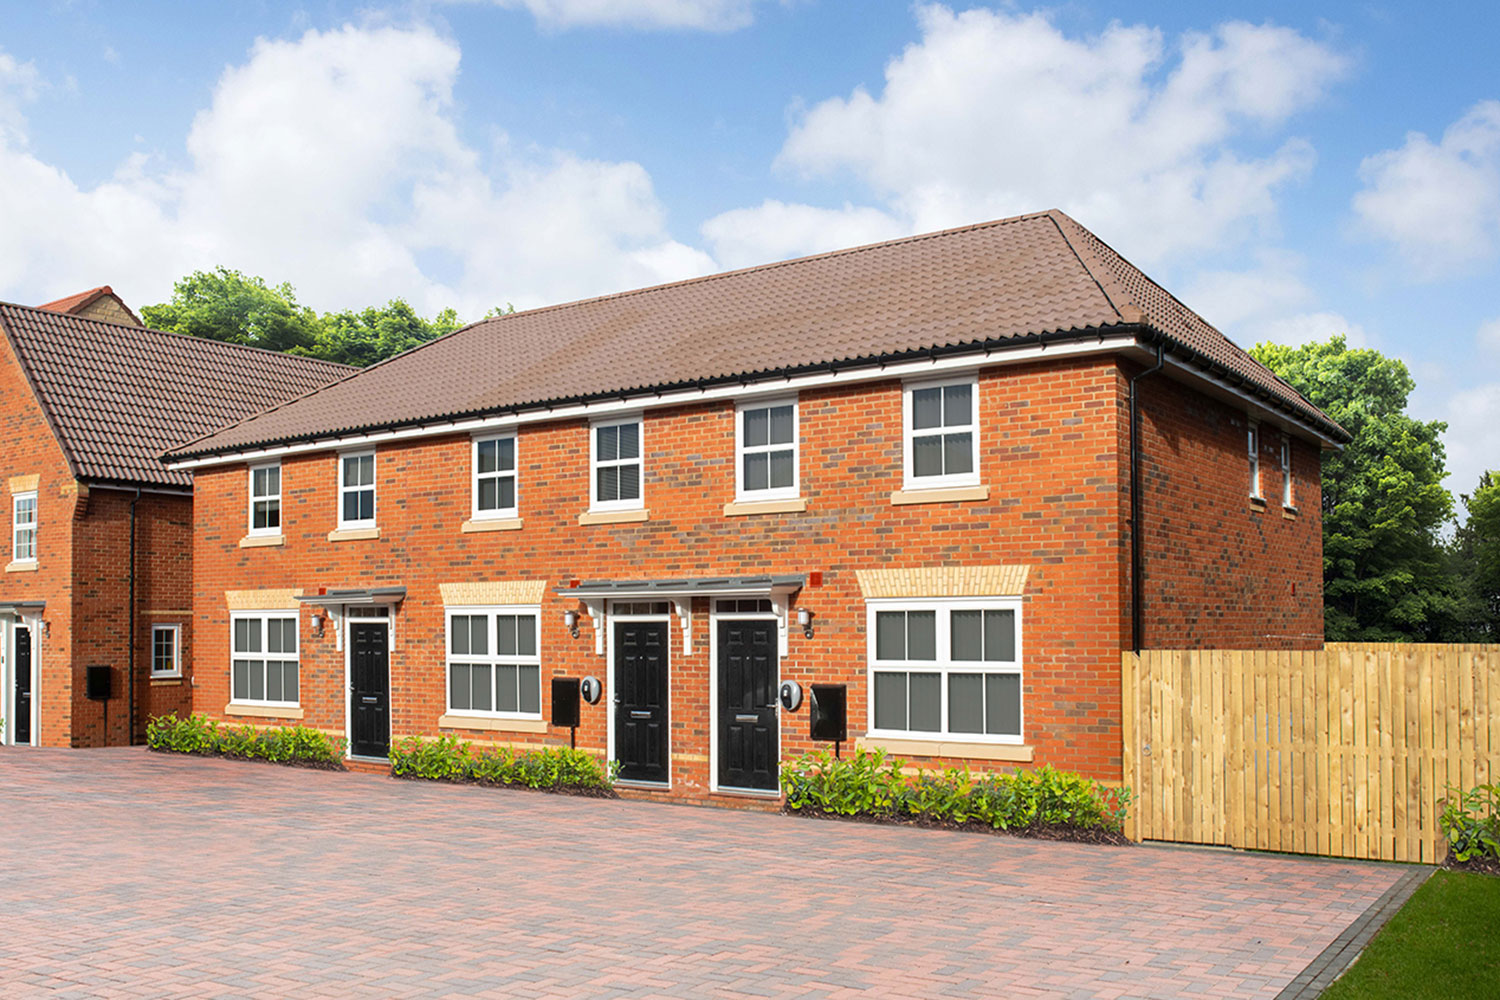 Property 1 of 9. The Archford At Minster View, Beverley